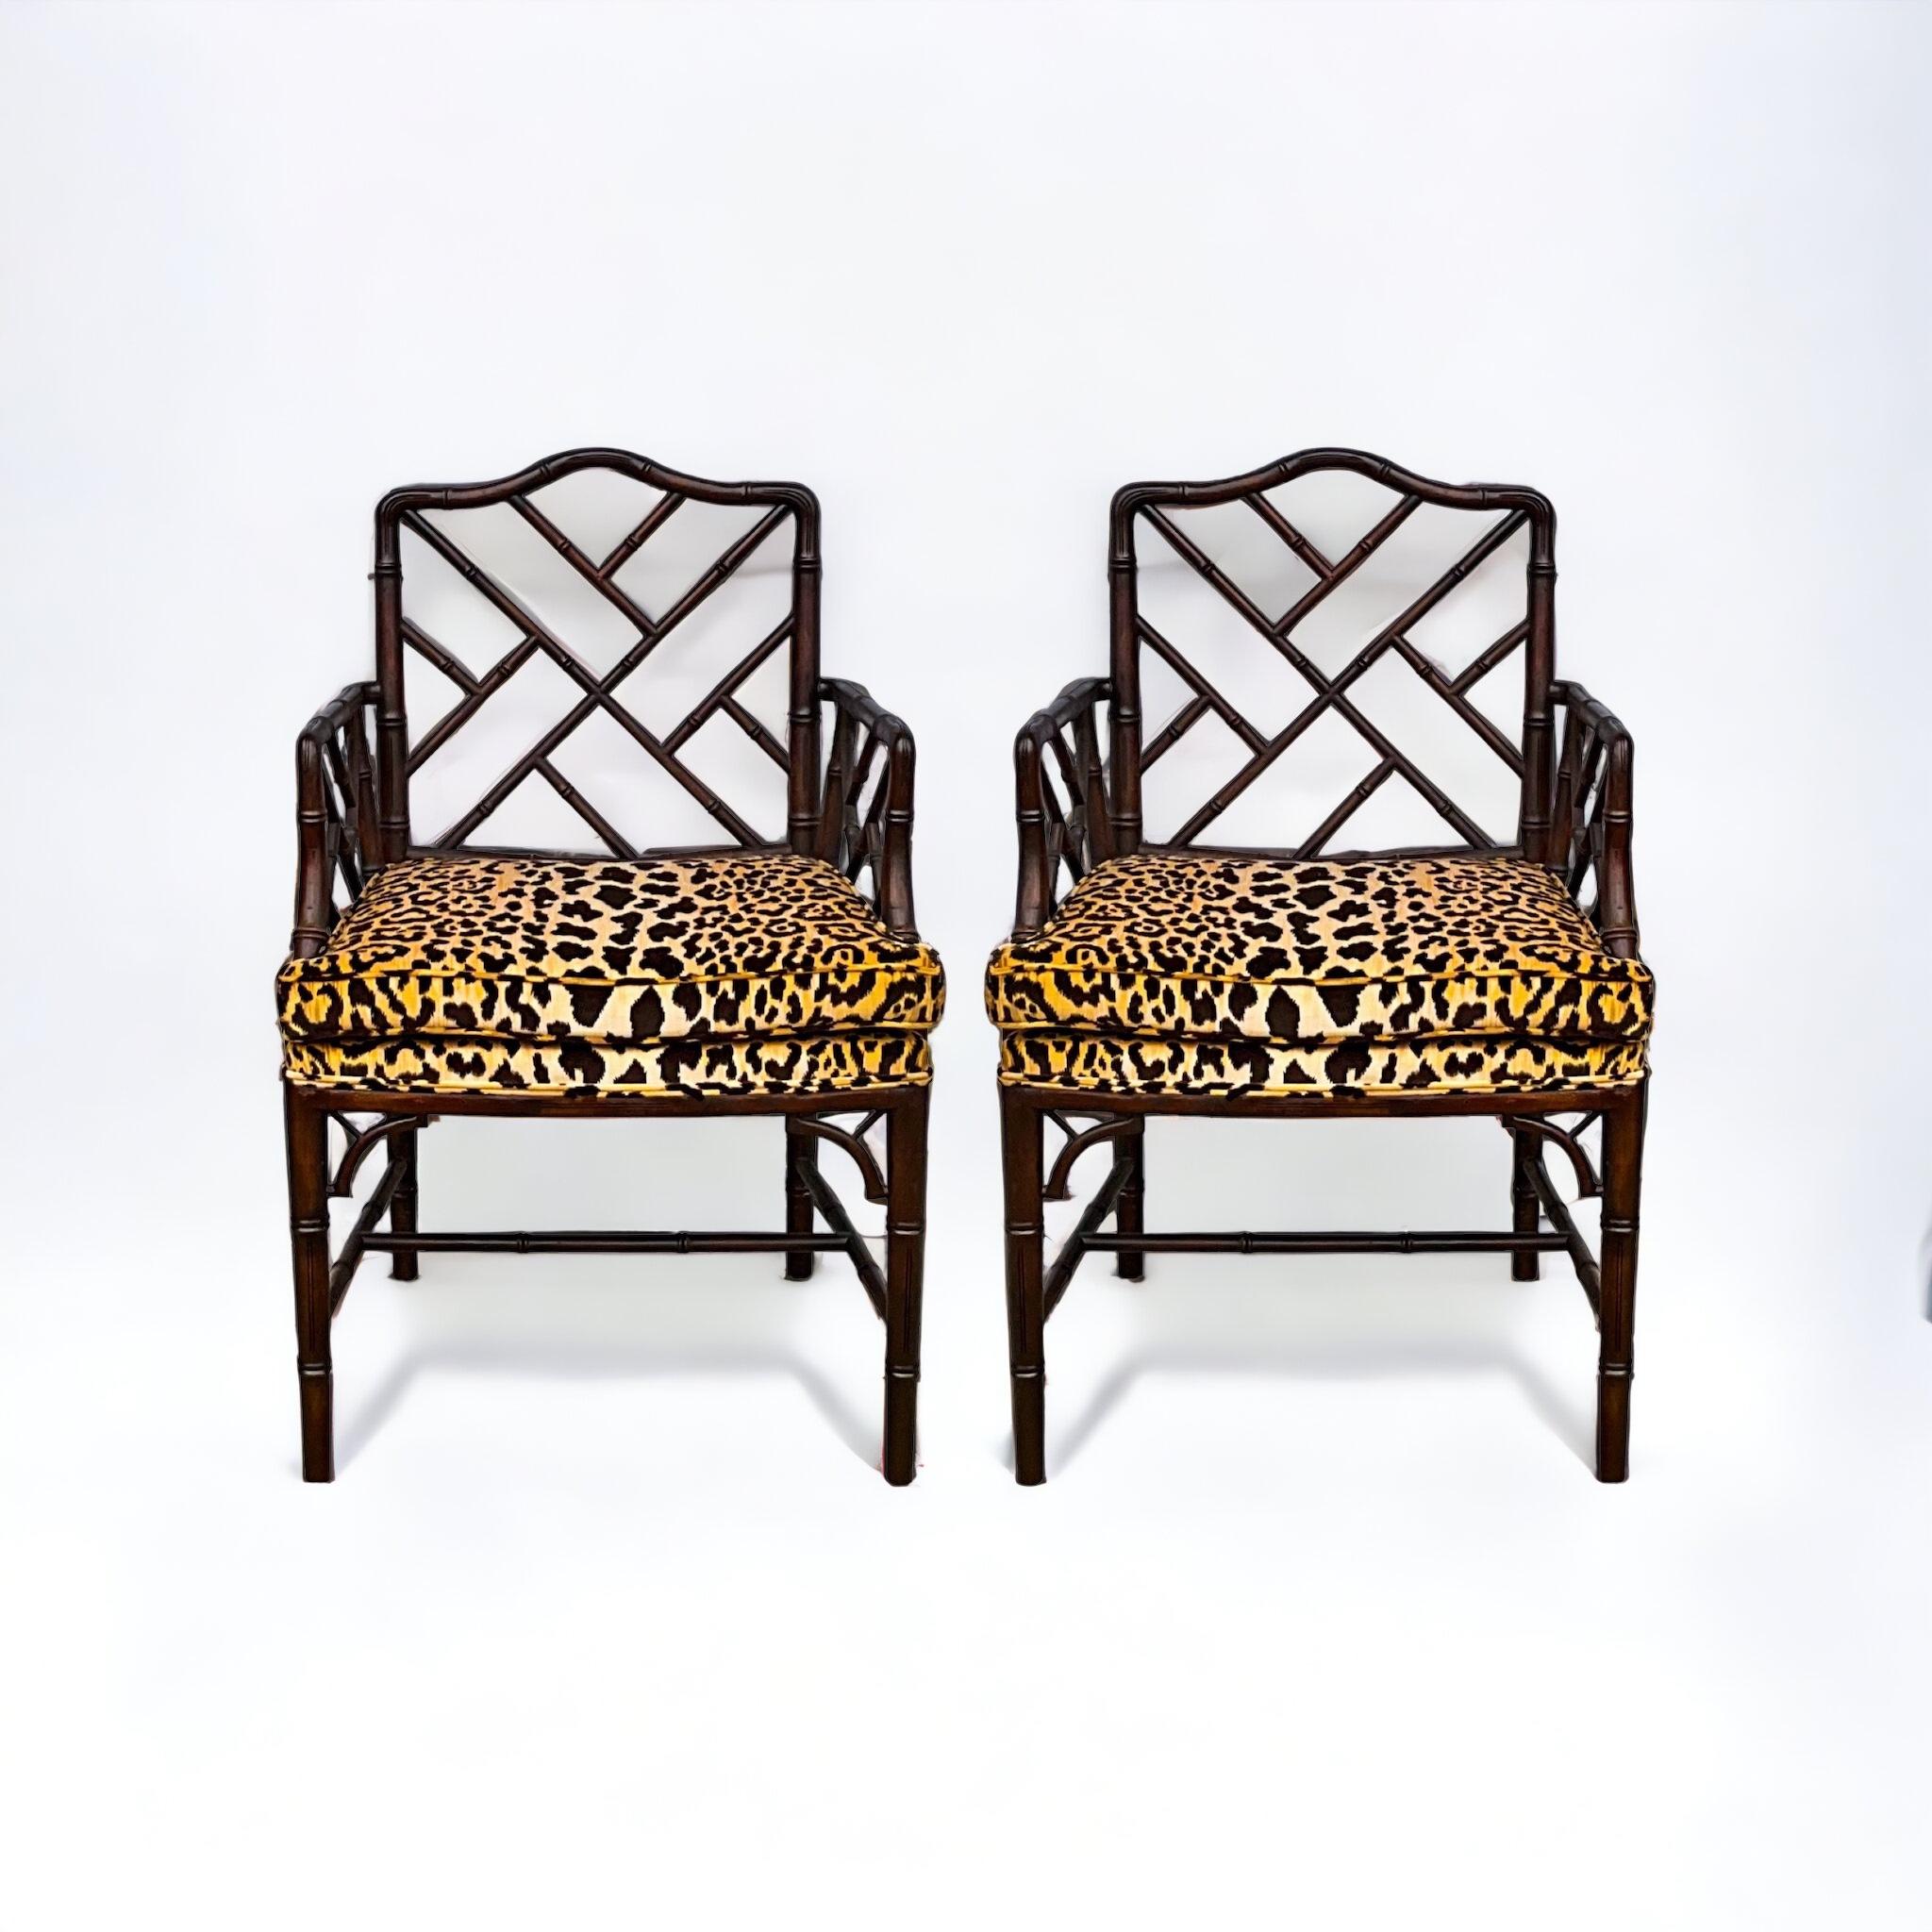 Regency Chinese Chippendale Style Faux Bamboo Arm Chairs In Velvet Leopard -Pair In Good Condition For Sale In Kennesaw, GA